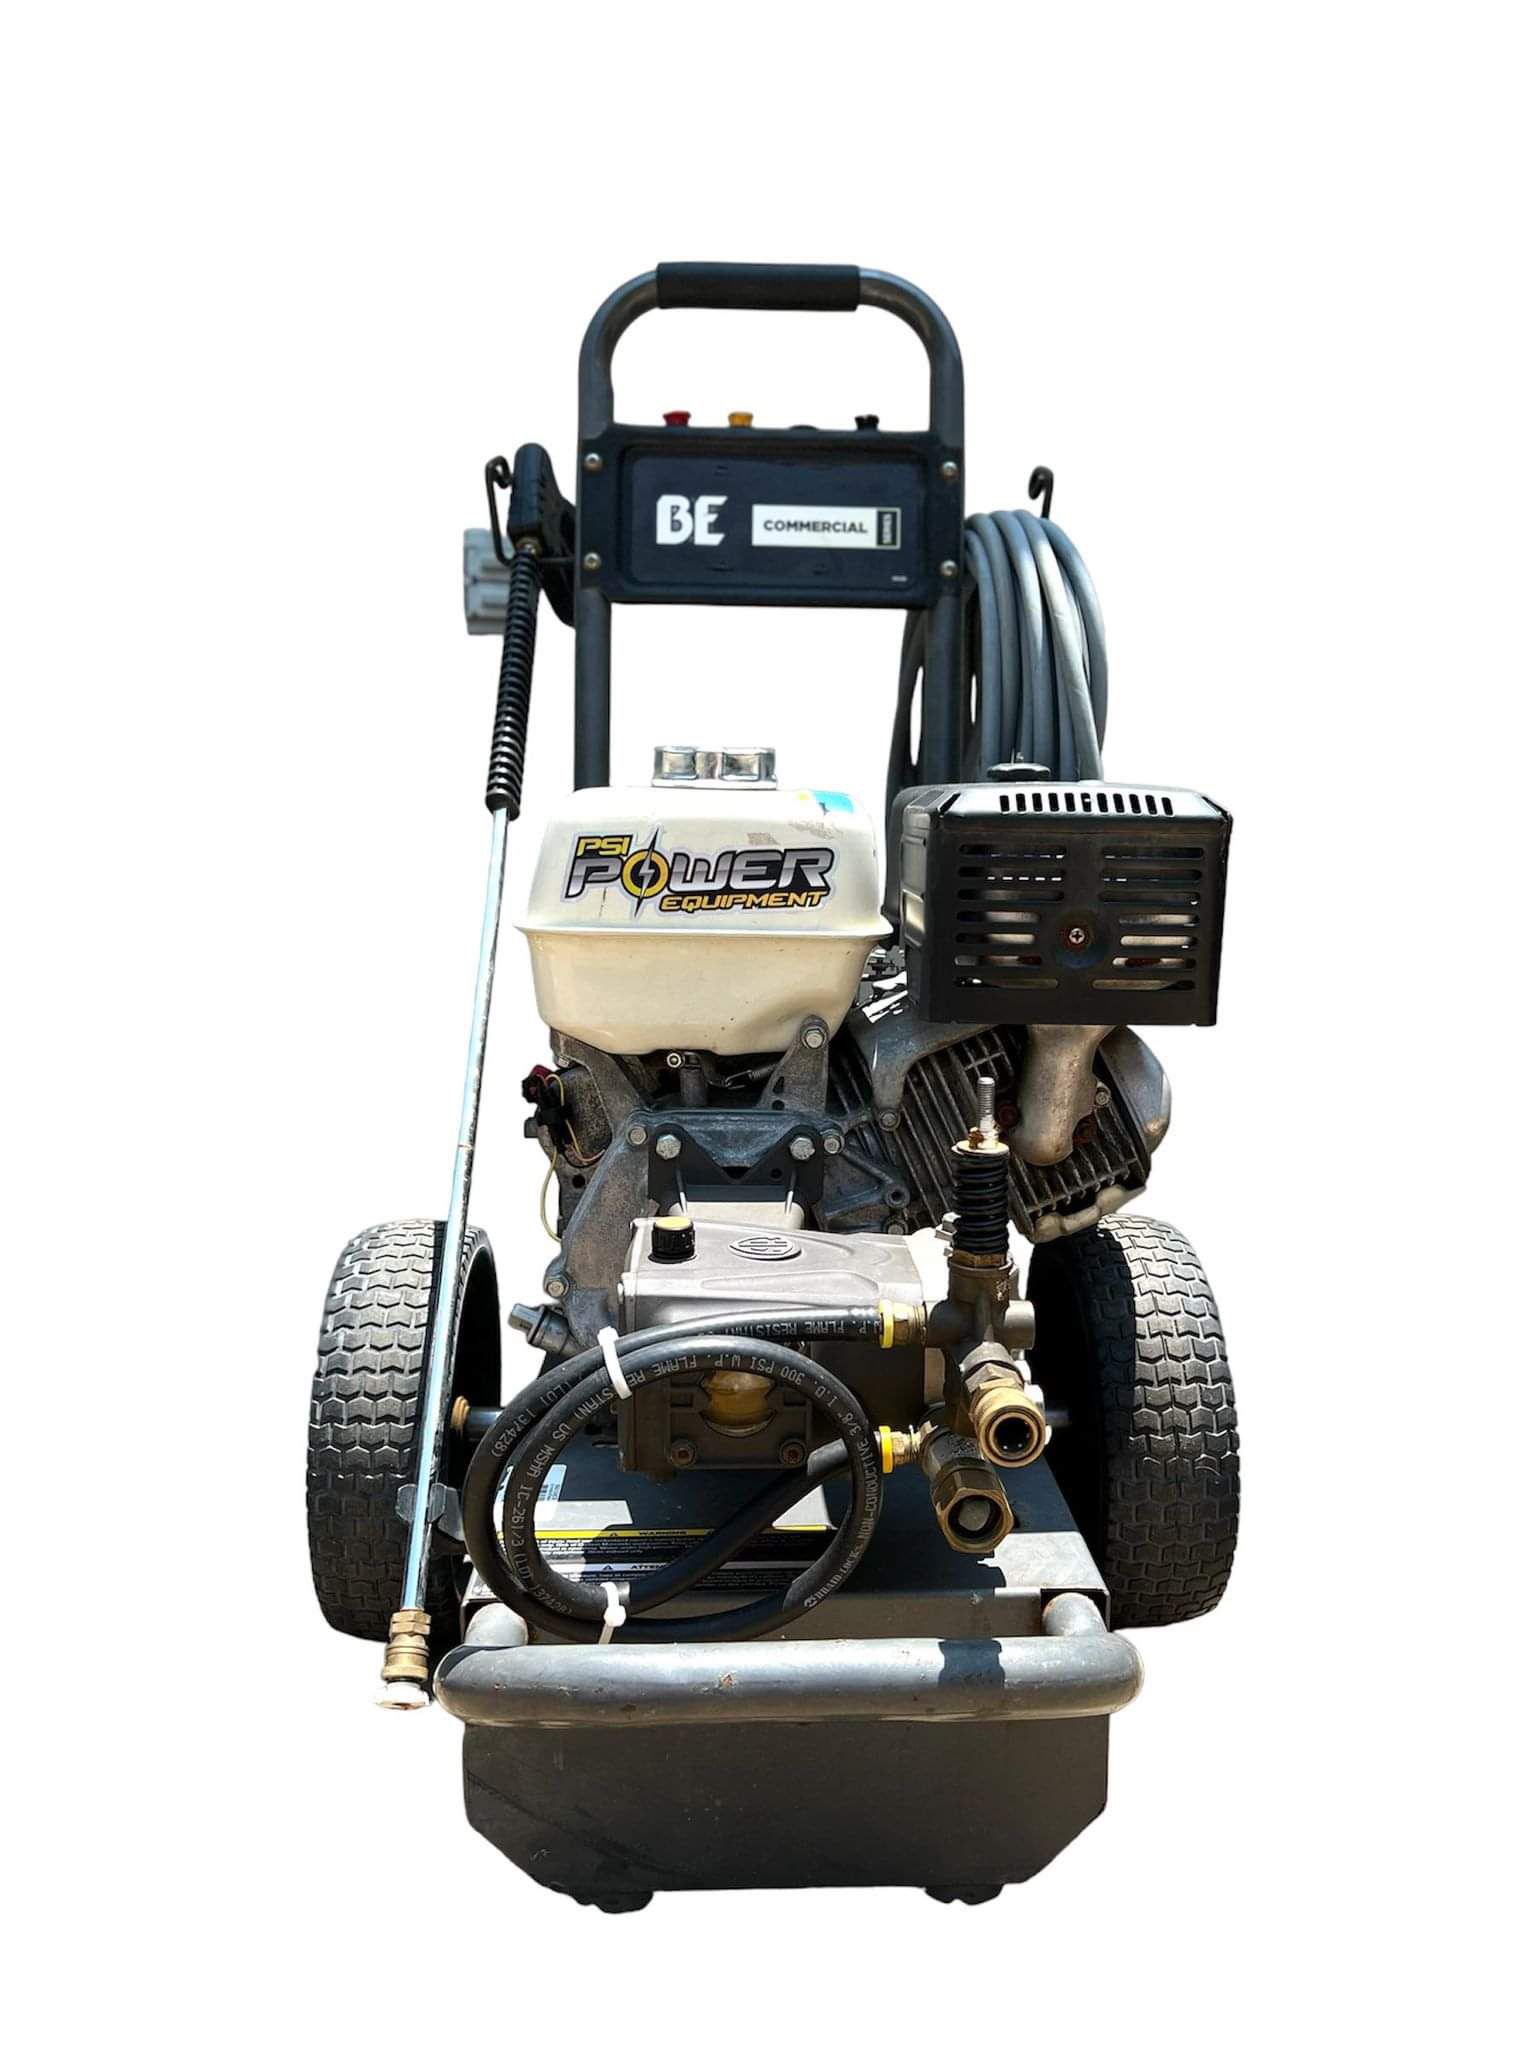 Small Engine and Pressure Washer S3rvices